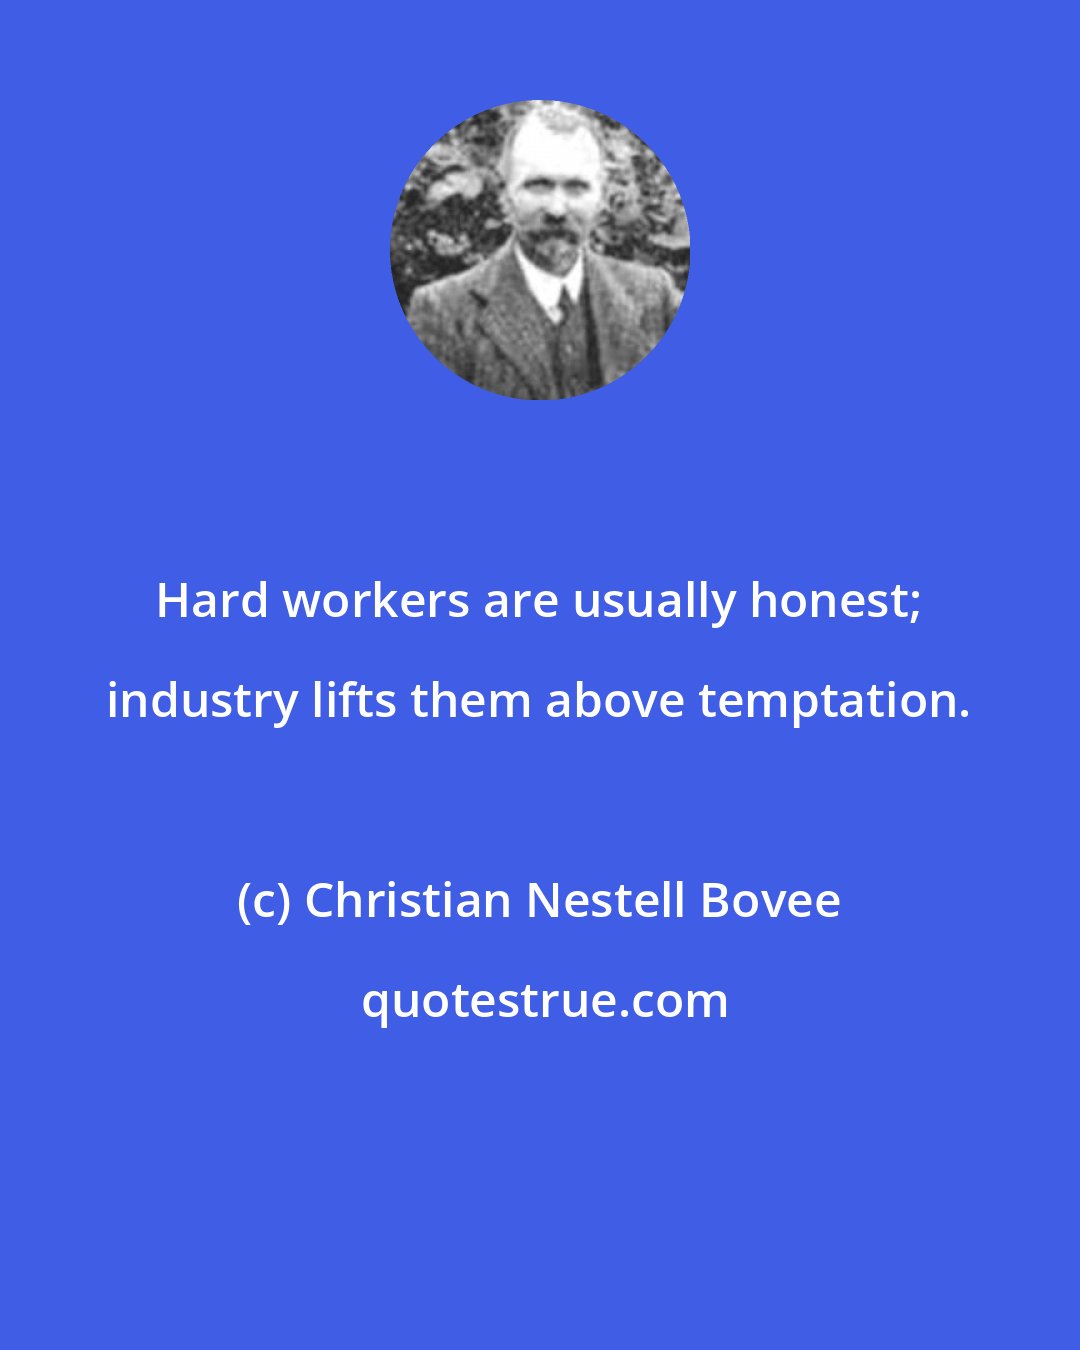 Christian Nestell Bovee: Hard workers are usually honest; industry lifts them above temptation.